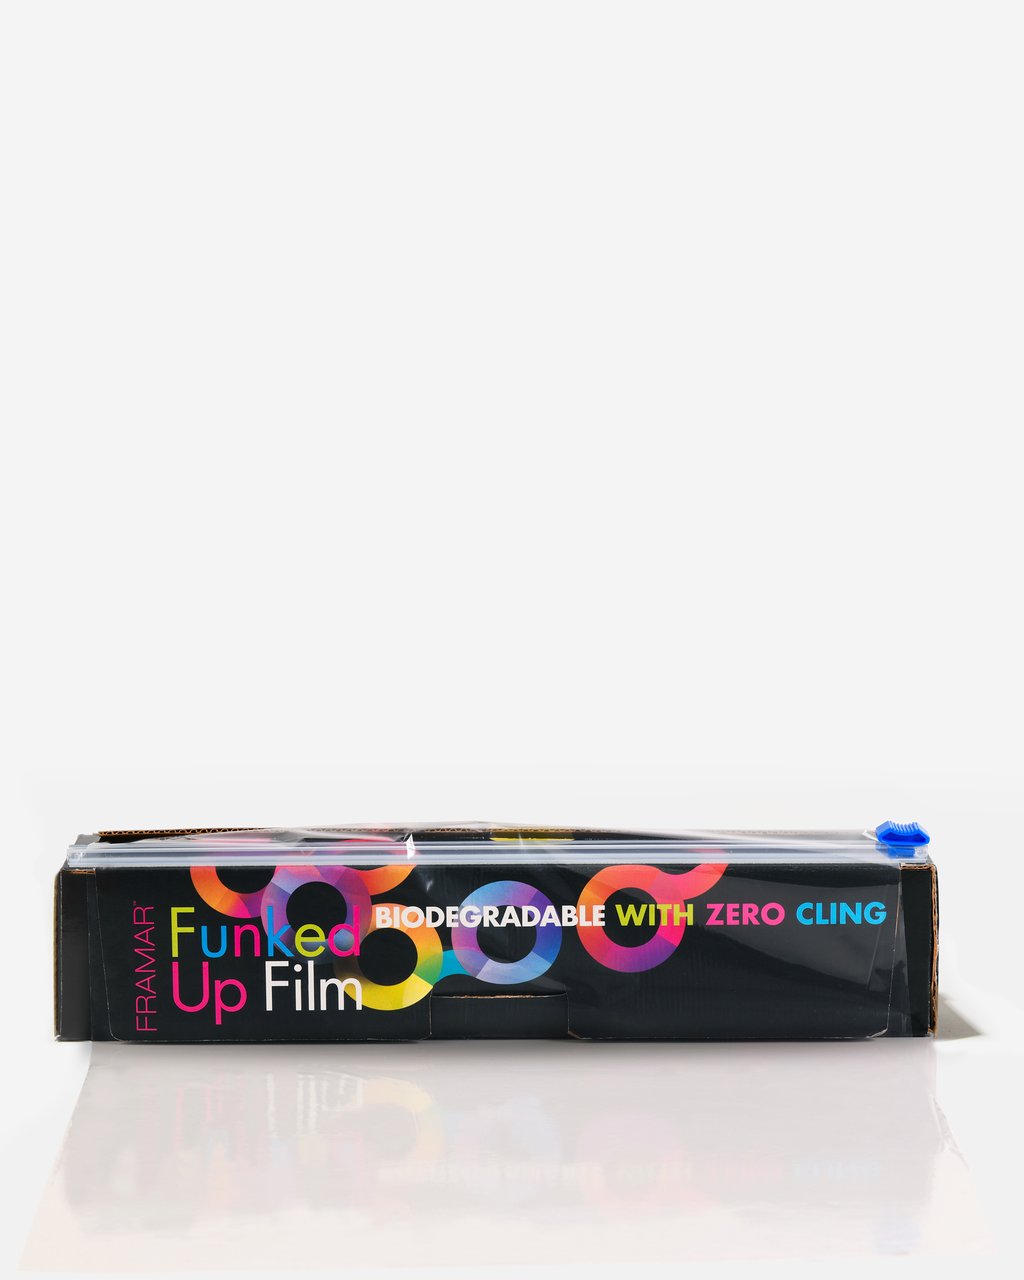 Framar - Funked Up Film (Clear) - Creata Beauty - Professional Beauty Products